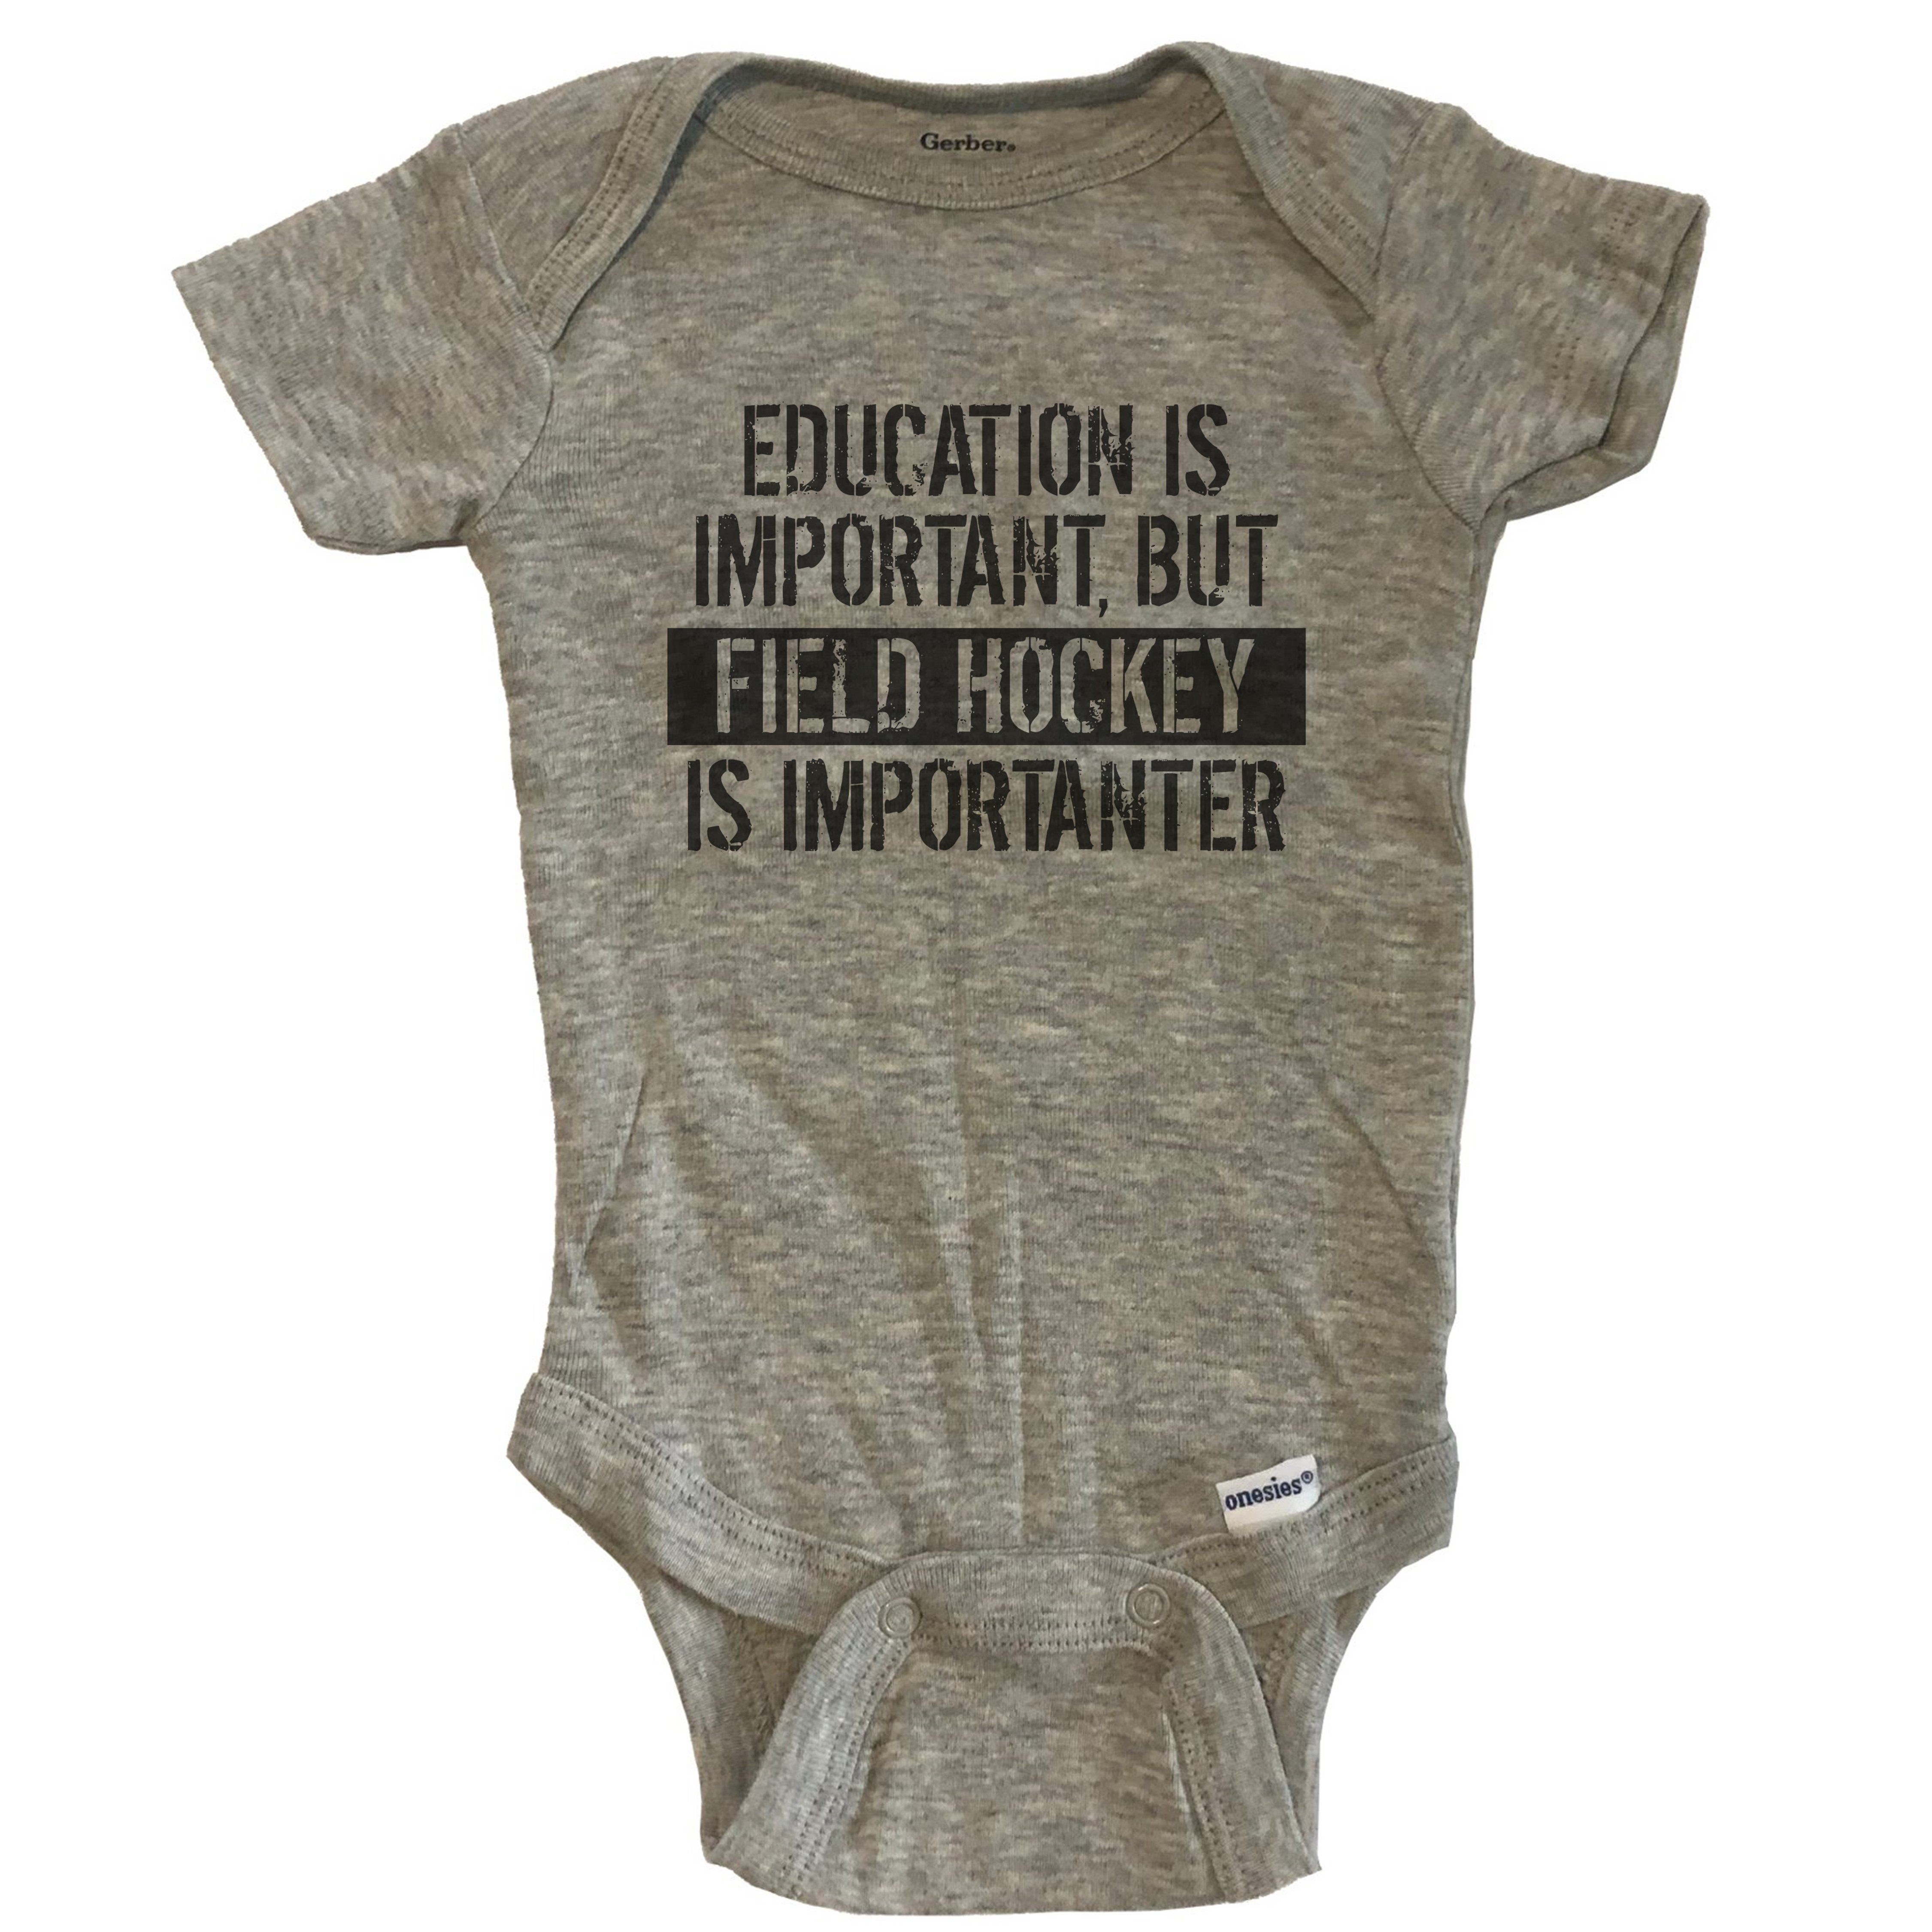 Vintage Hockey Shirts, School Is Important But Hockey Is Importanter, Funny Hockey Shirts